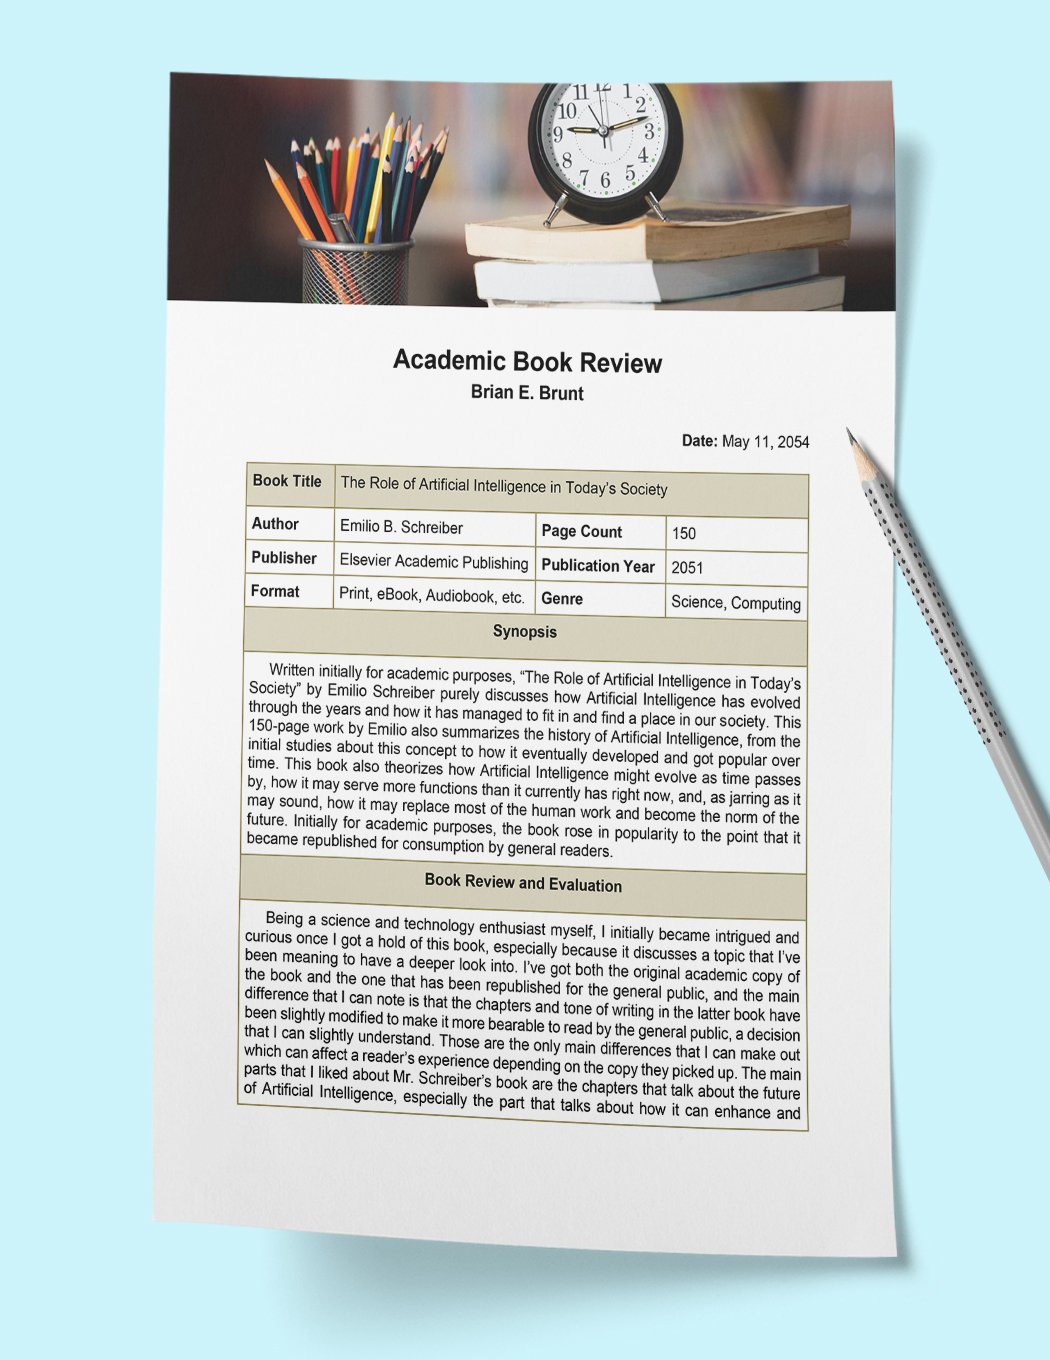 Academic Book Review Template